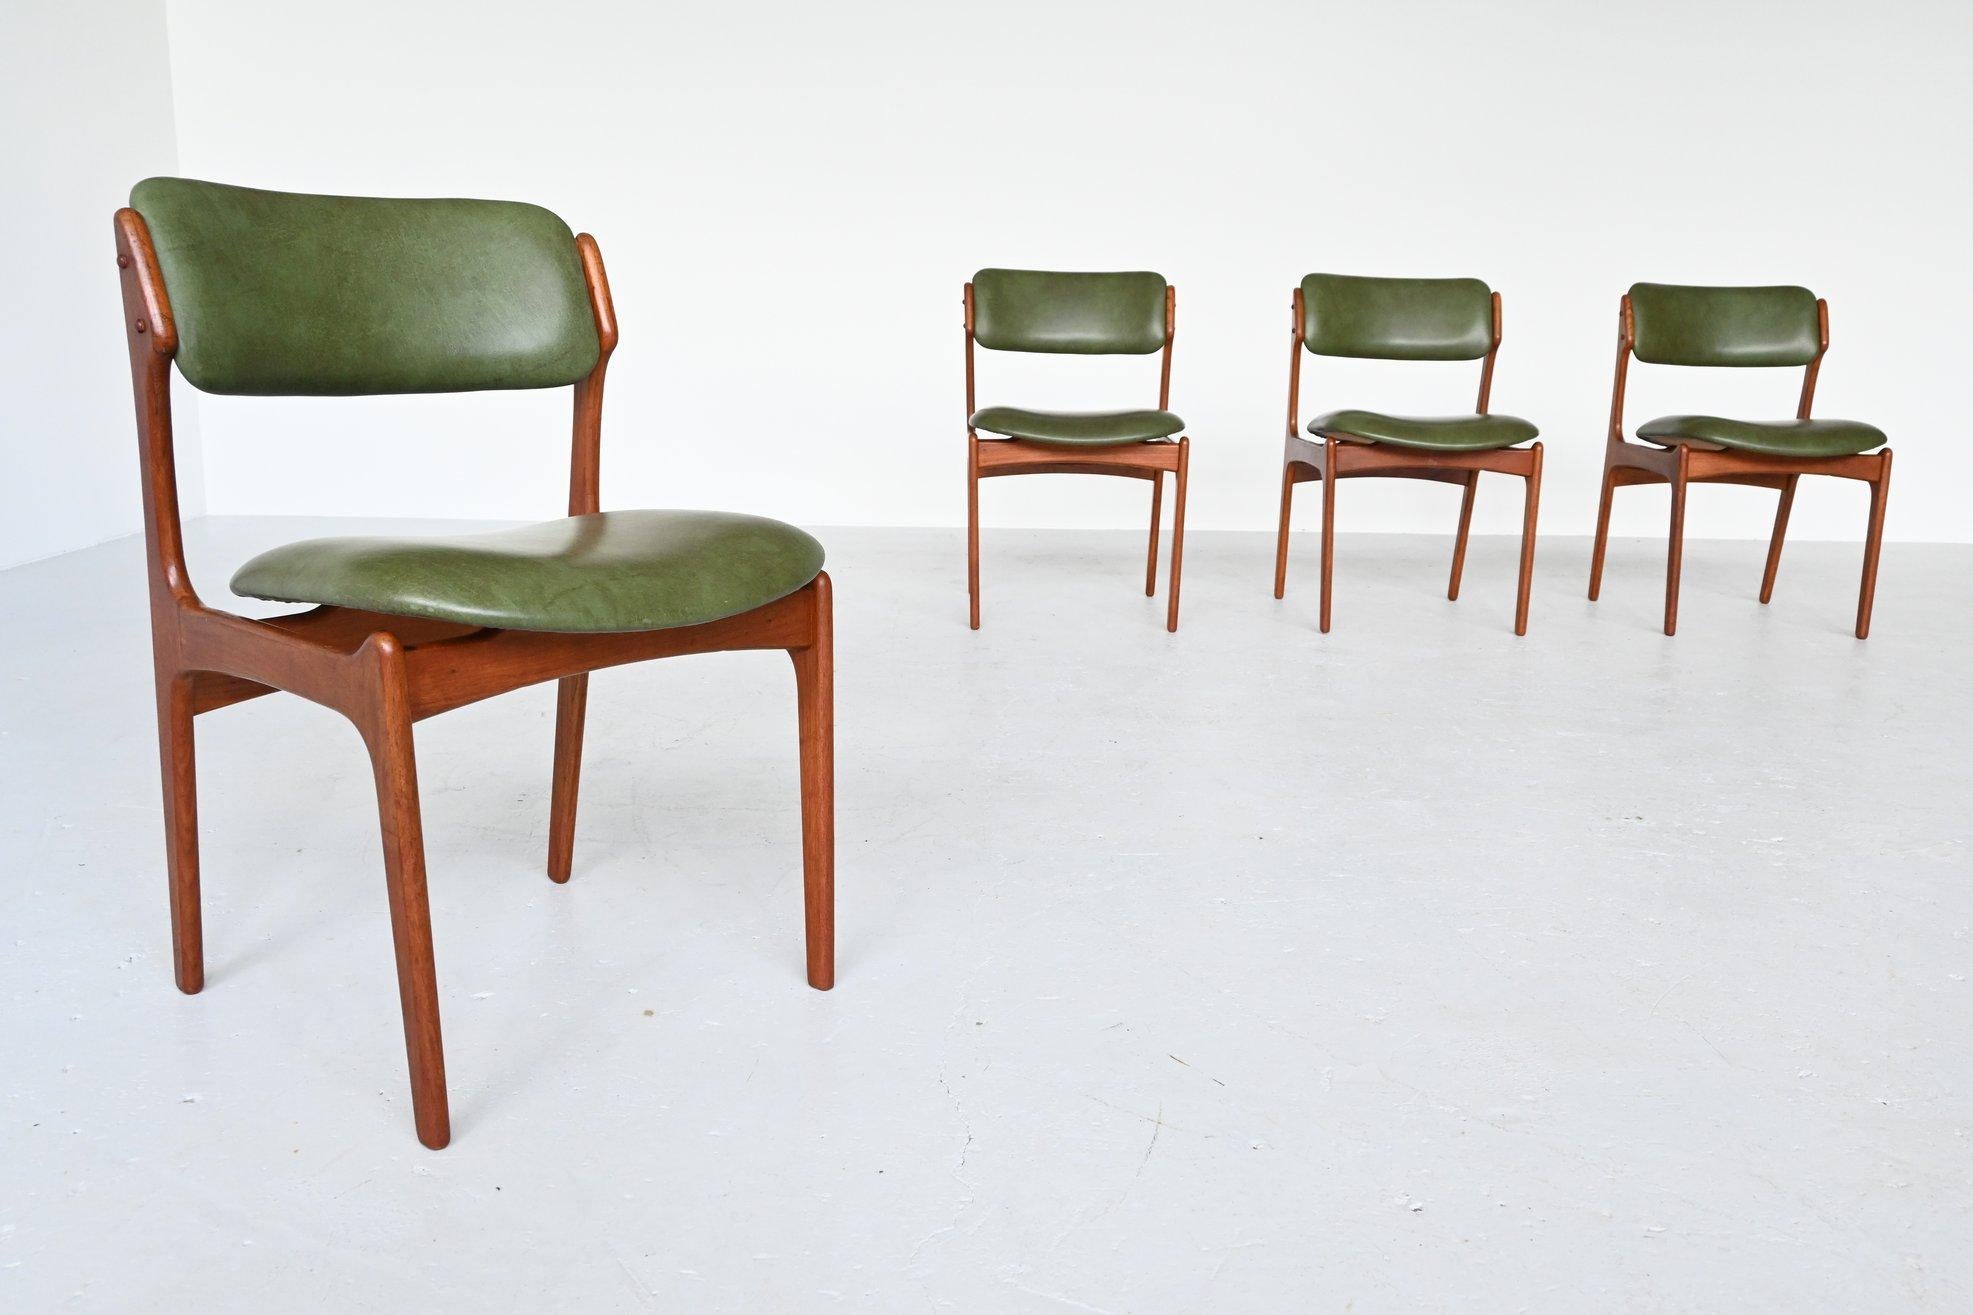 Beautiful shaped dining chairs model 49 designed by Erik Buch and manufactured by Oddense Maskinsnedkeri, Denmark 1960. The chairs feature a solid teak wooden frame and the floating seats are upholstered in original green faux leather. They seat